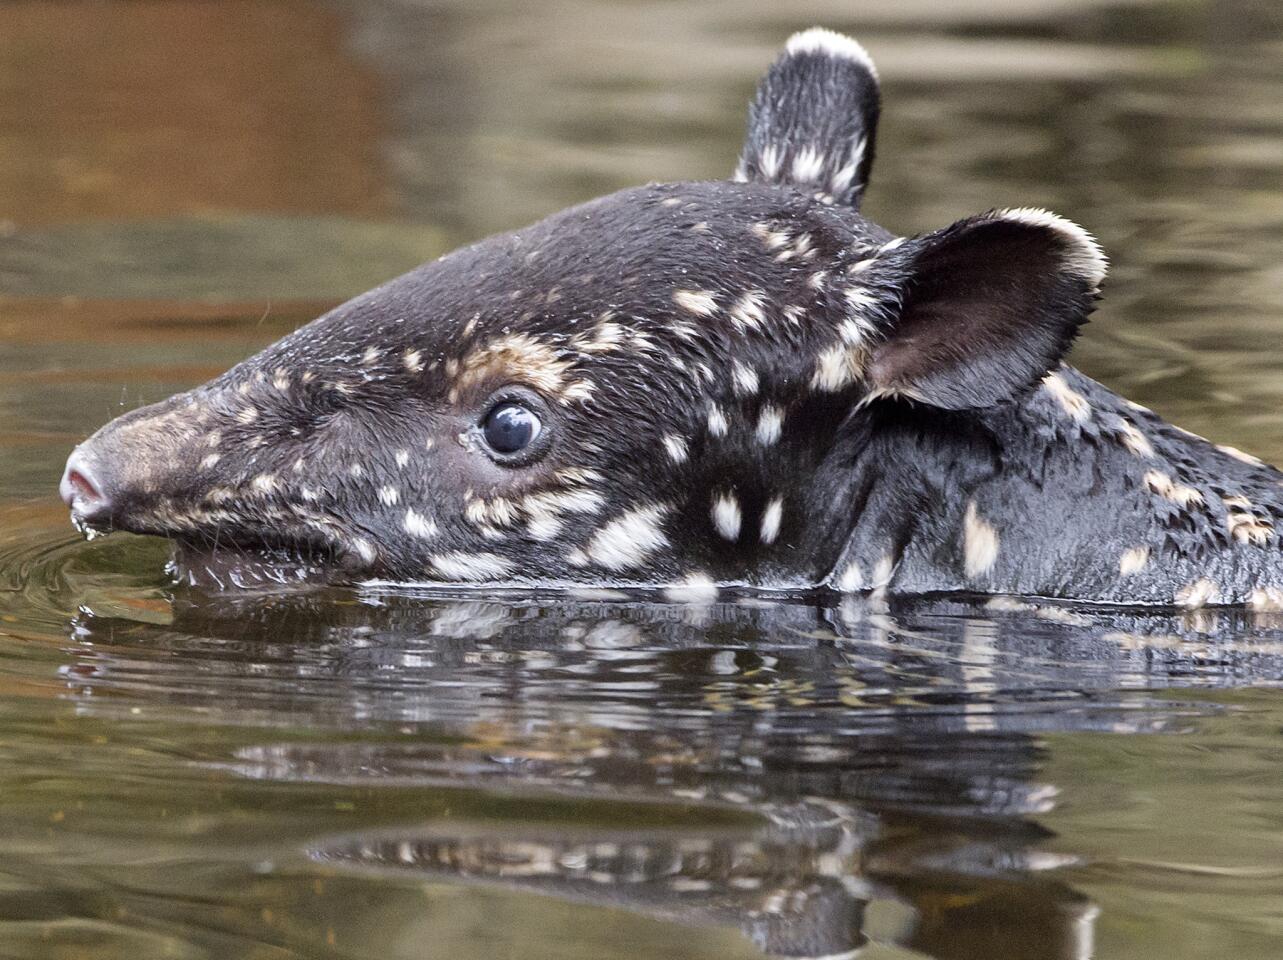 A young male Malayan tapir swims in the enclosure in the zoo in Leipzig, Germany, on June 15, 2016. The tapir was born June 2, 2016.